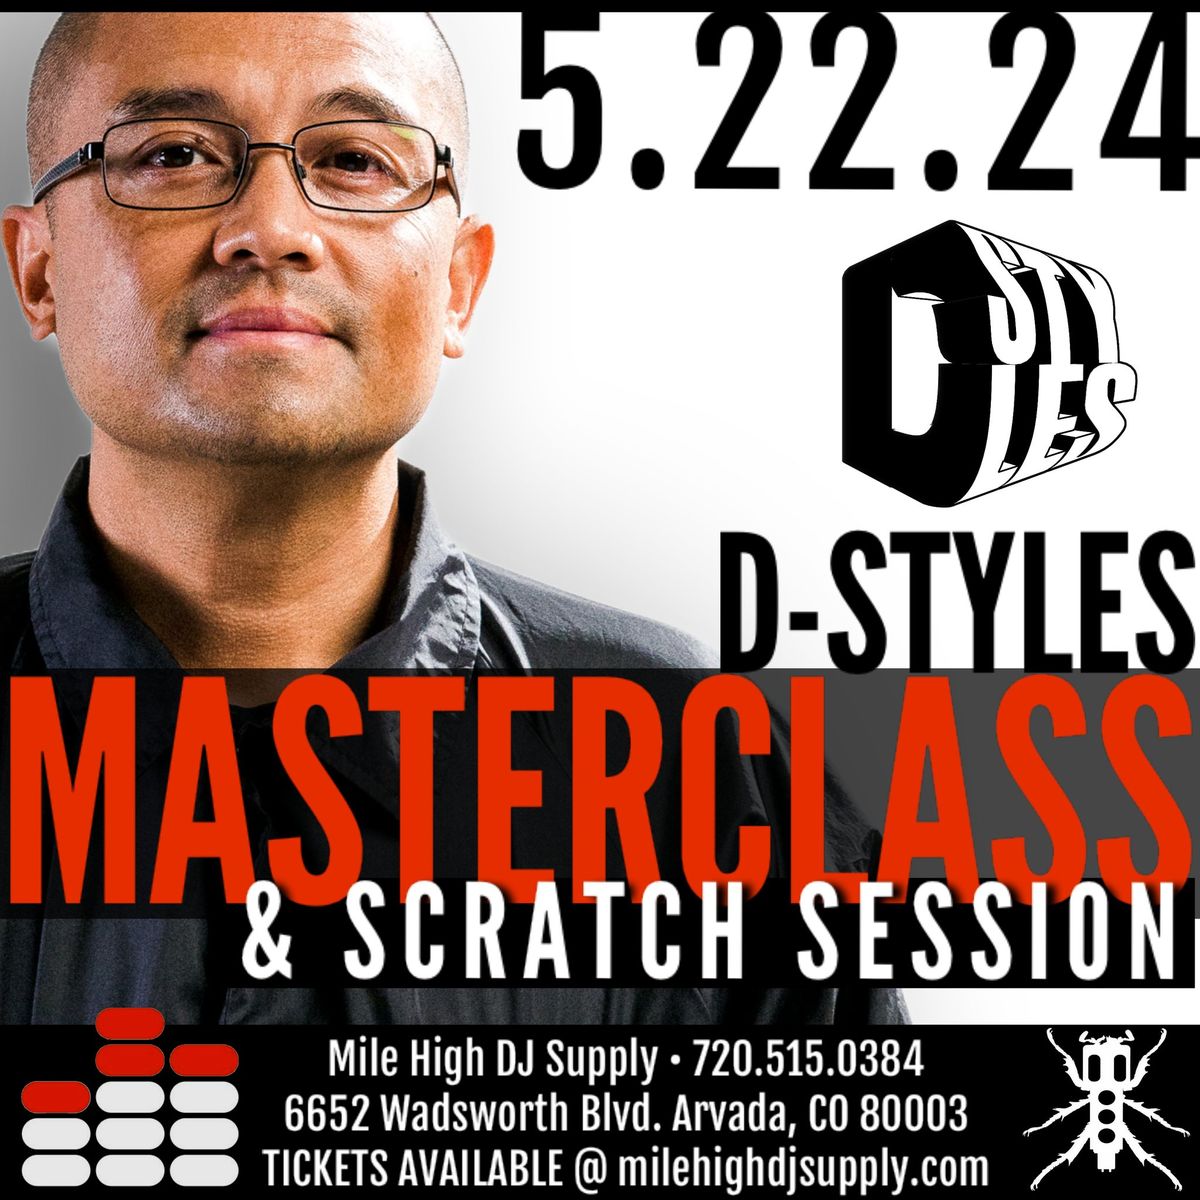 Wed. May 22: D-STYLES MasterClass @ Mile High DJ Supply